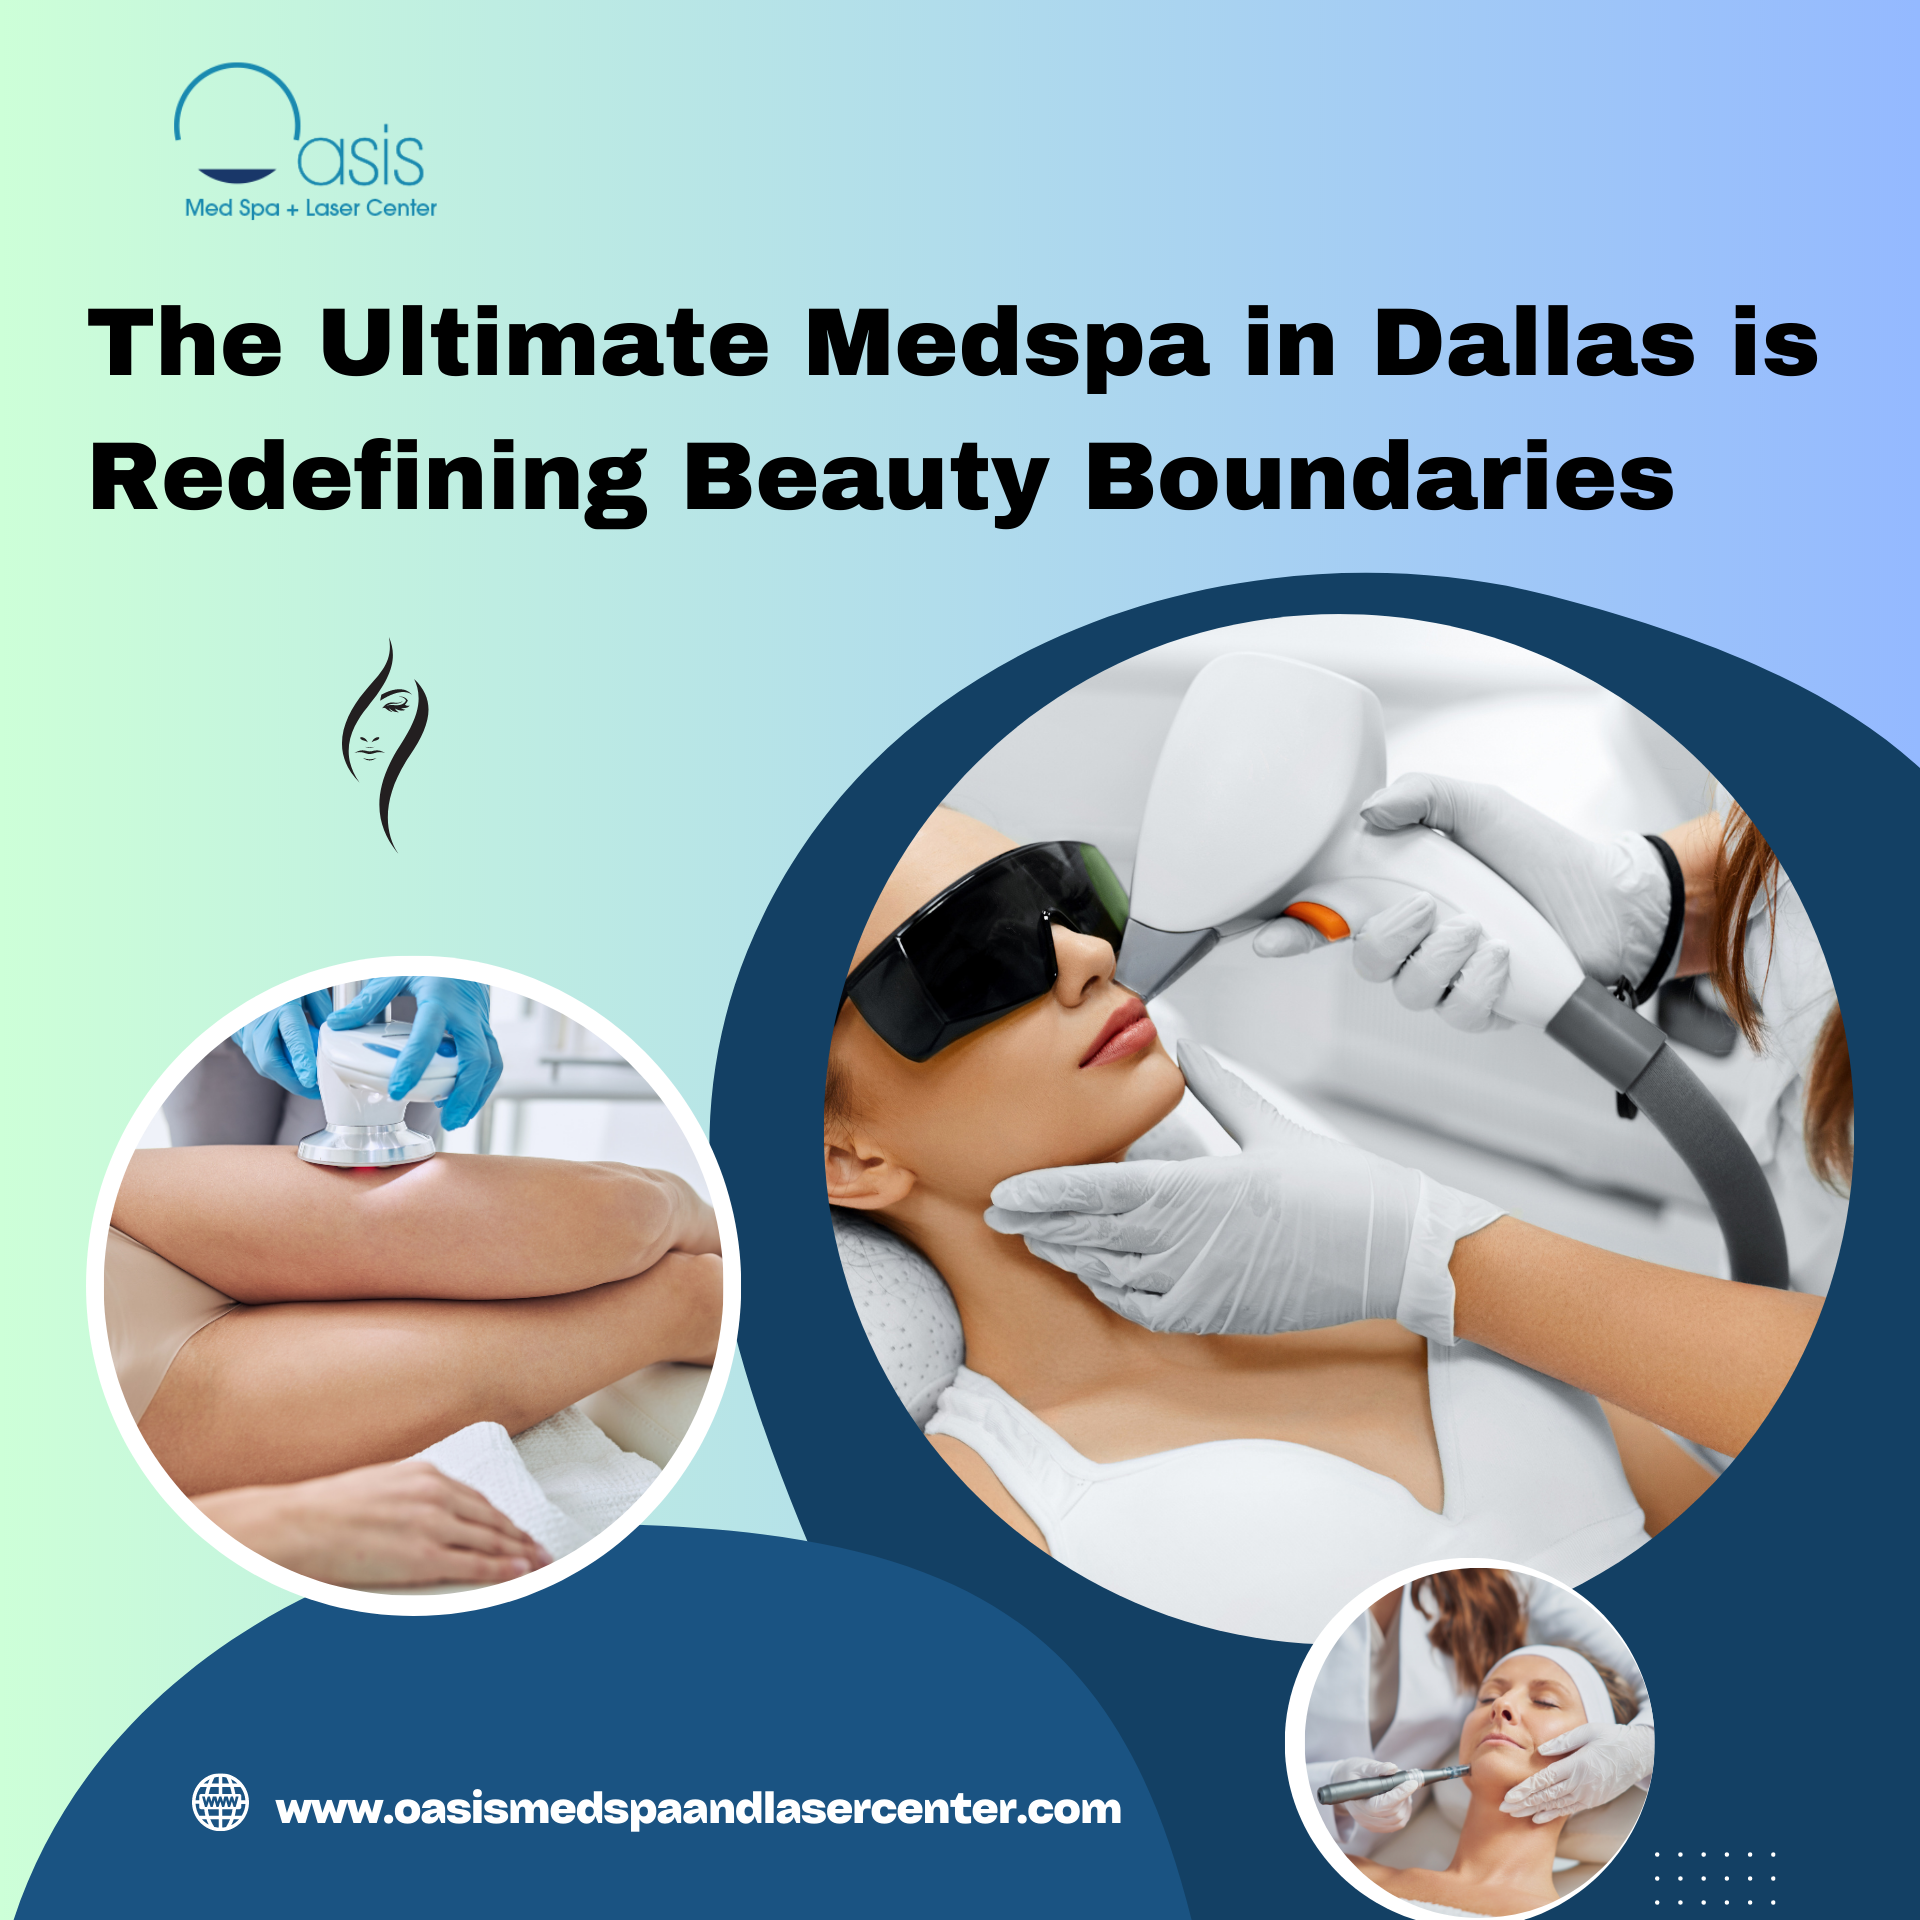 The Ultimate Medspa in Dallas is Redefining Beauty Boundaries